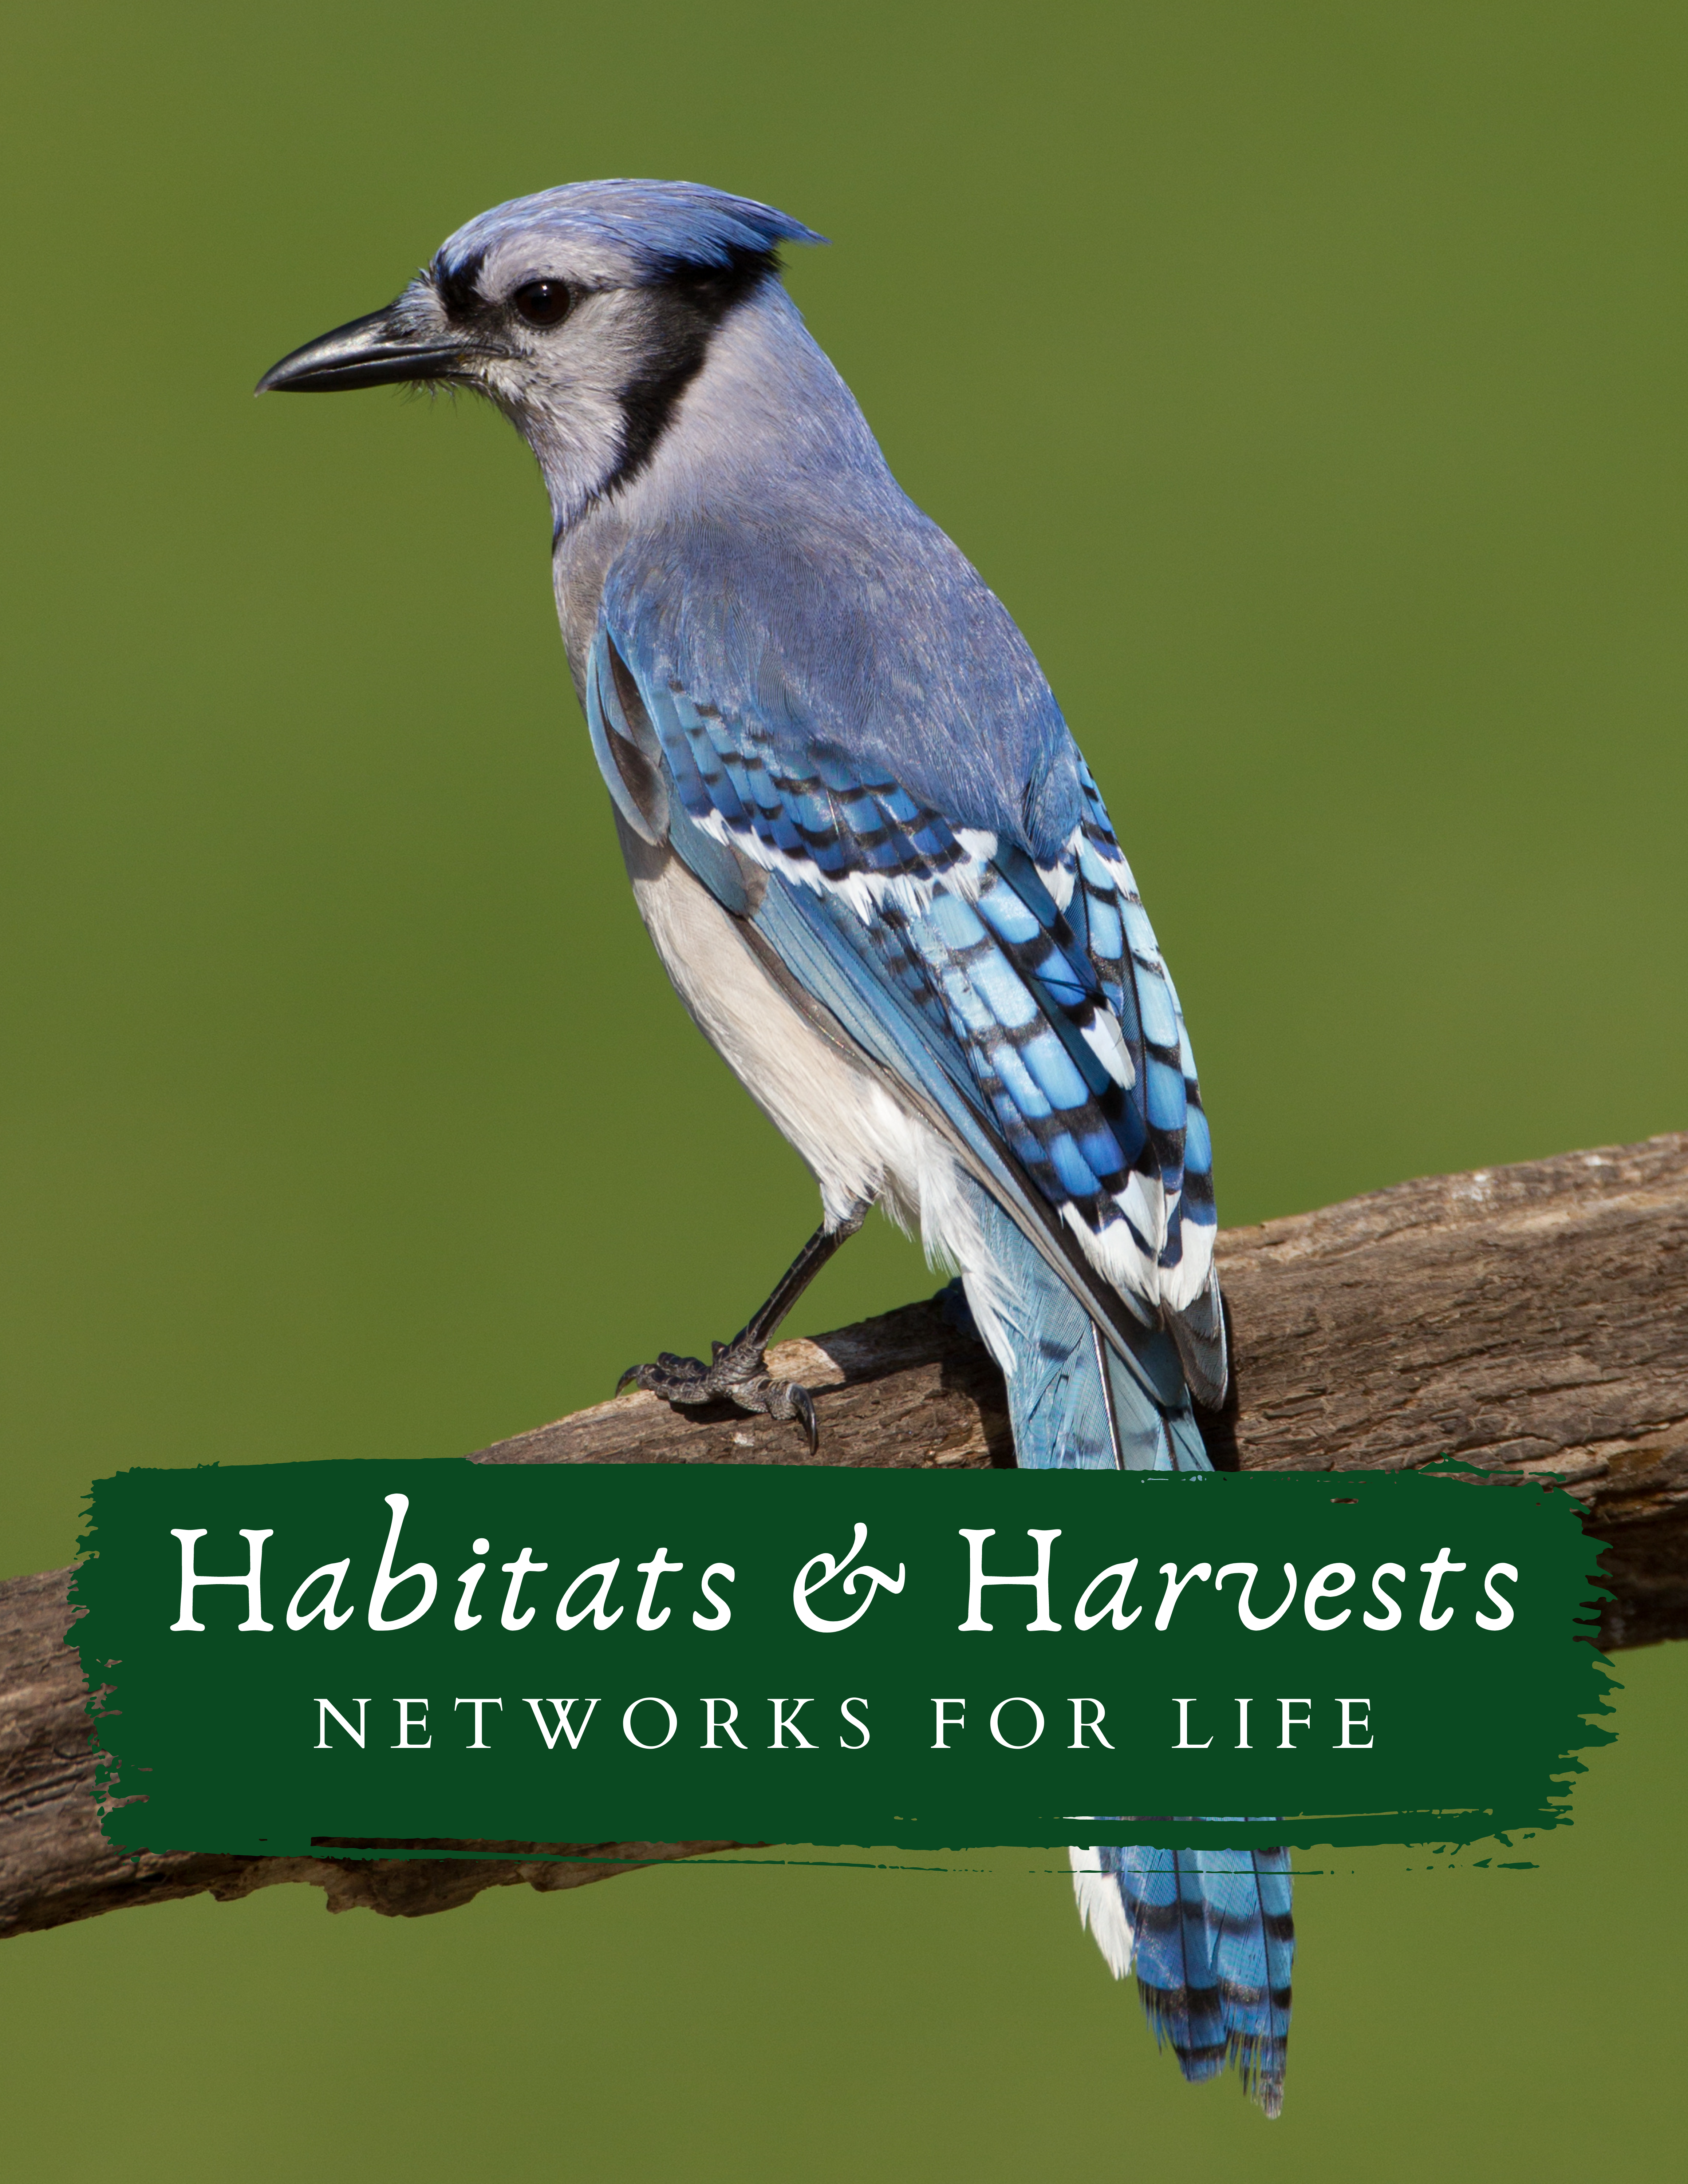 Bluejay on a branch with text "Habitats and Harvests: Networks for Life"